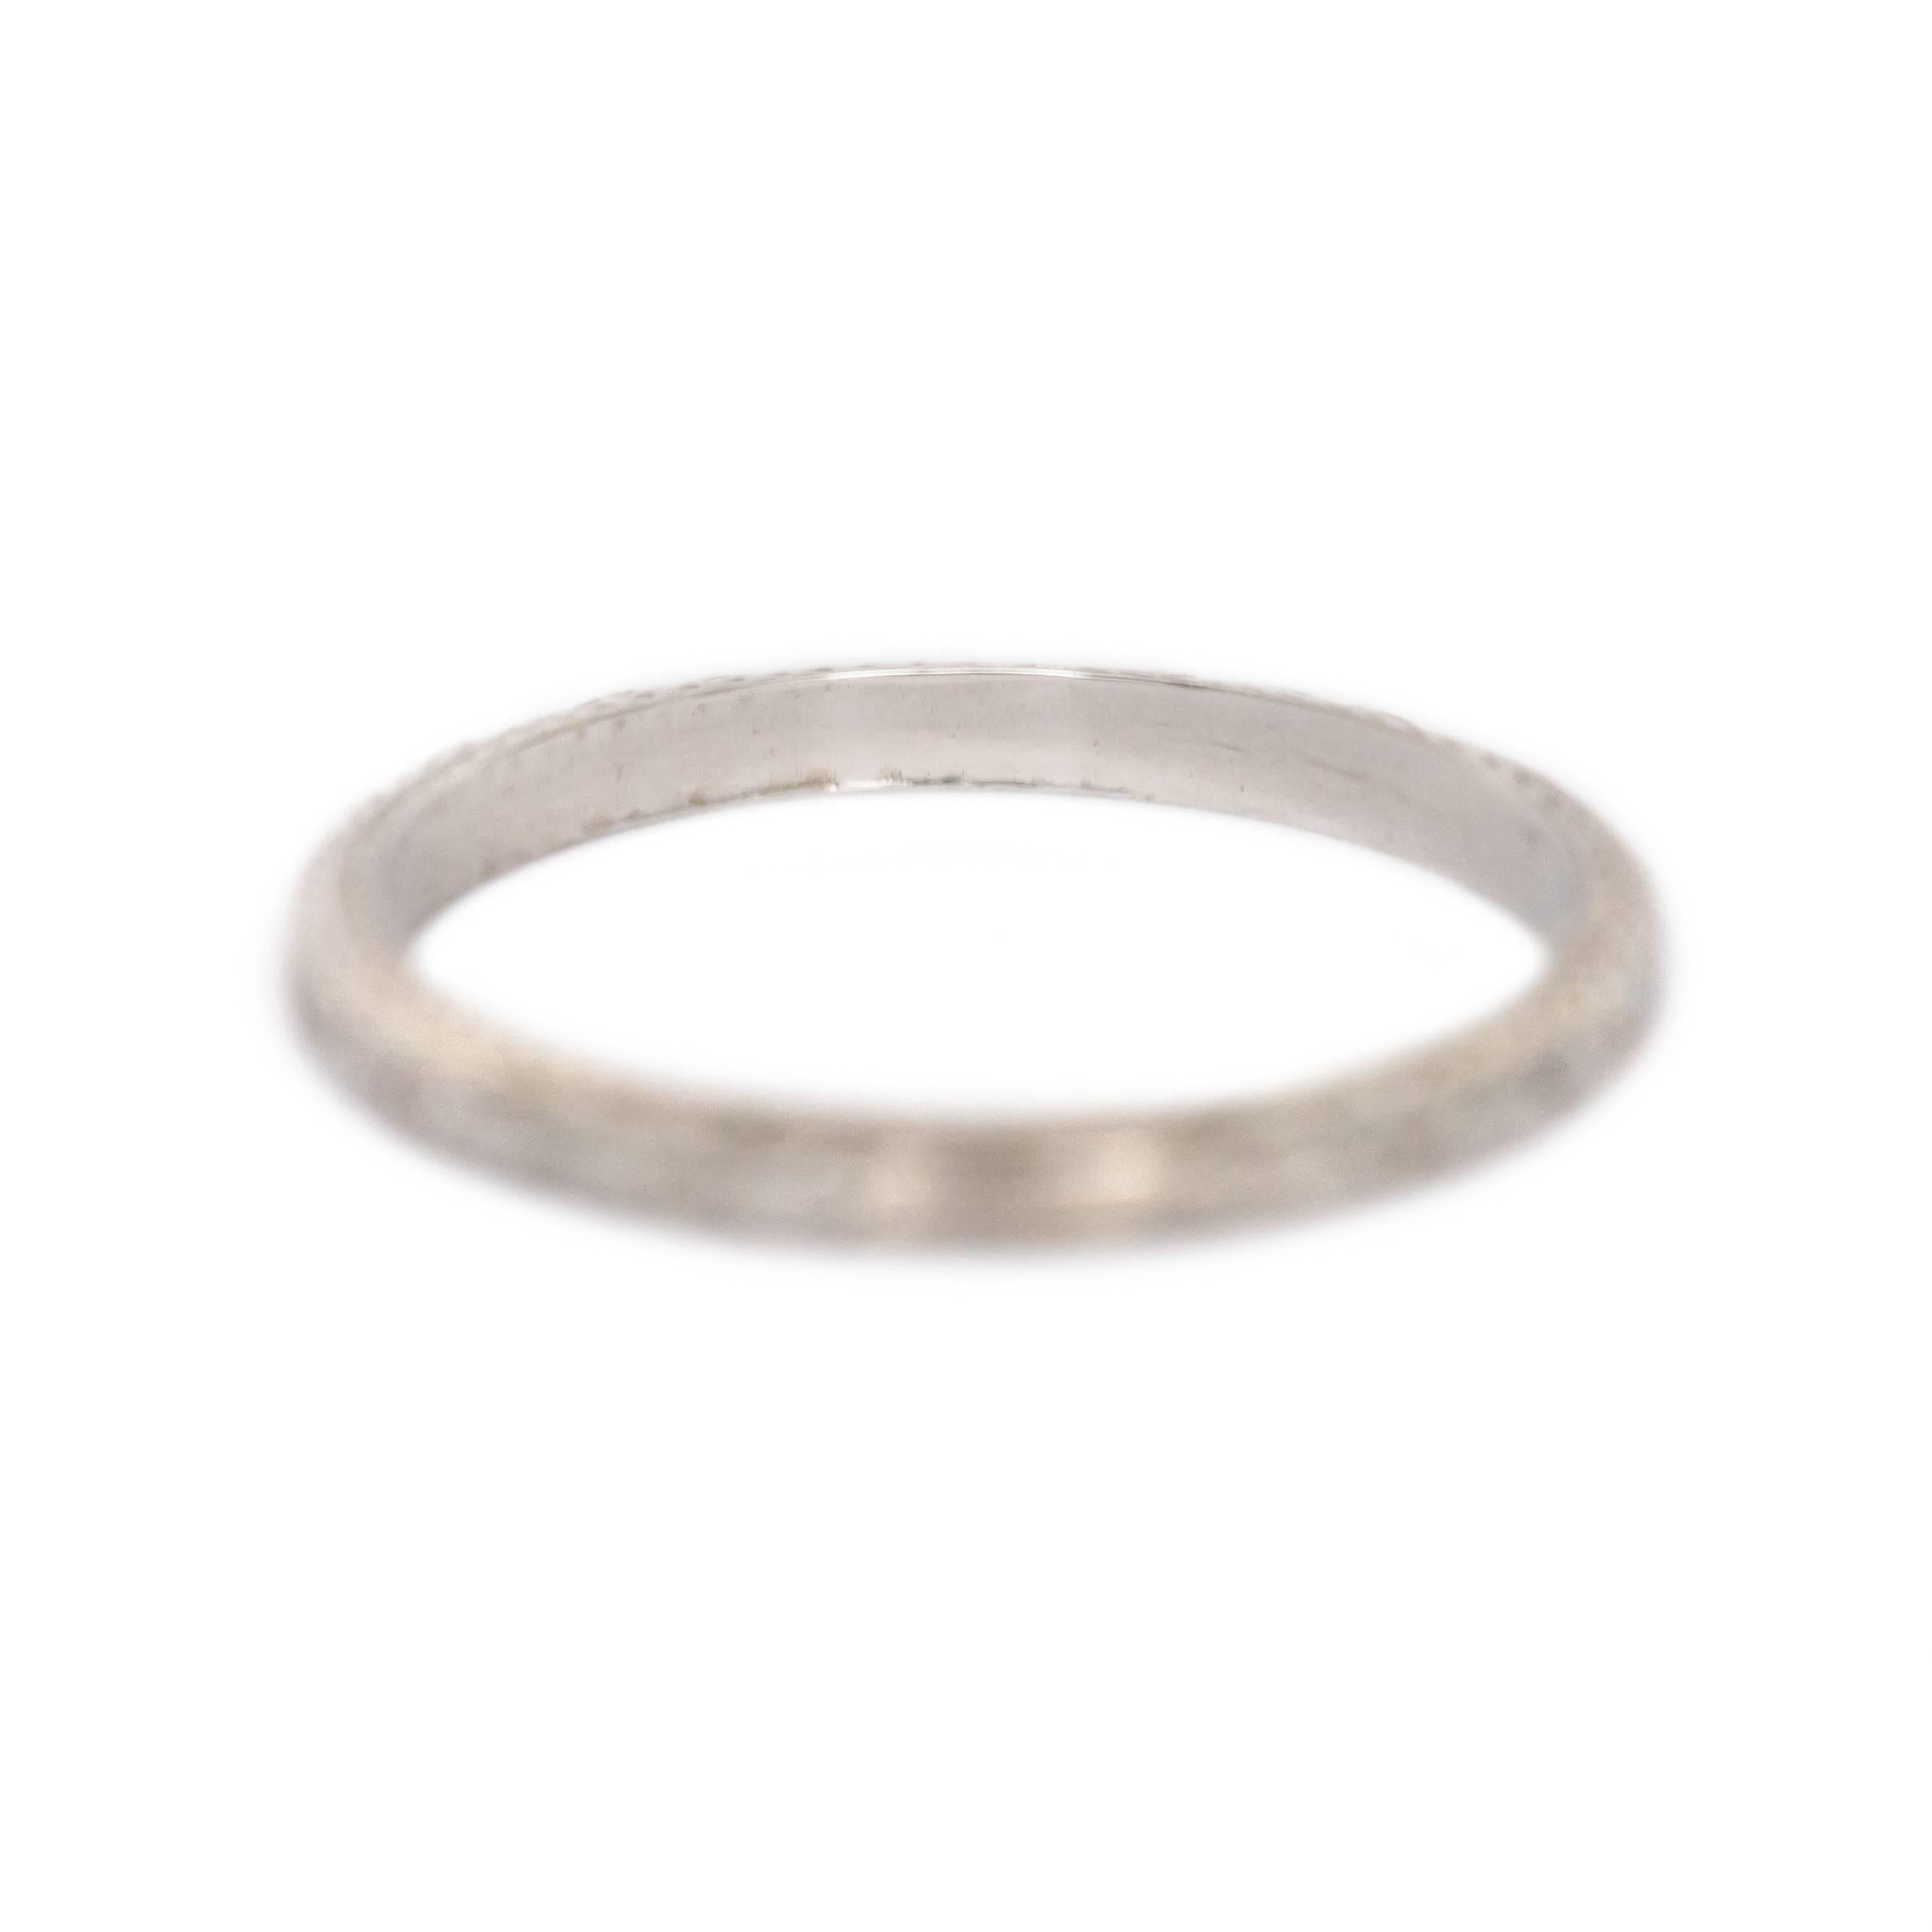 Item Details: 
Ring Size: Approximately 10.20
Metal Type: 18 Karat White Gold
Weight: 2.6 grams

Width of band: 2.32 mm

Finger to Top of Stone Measurement: 1.47 mm